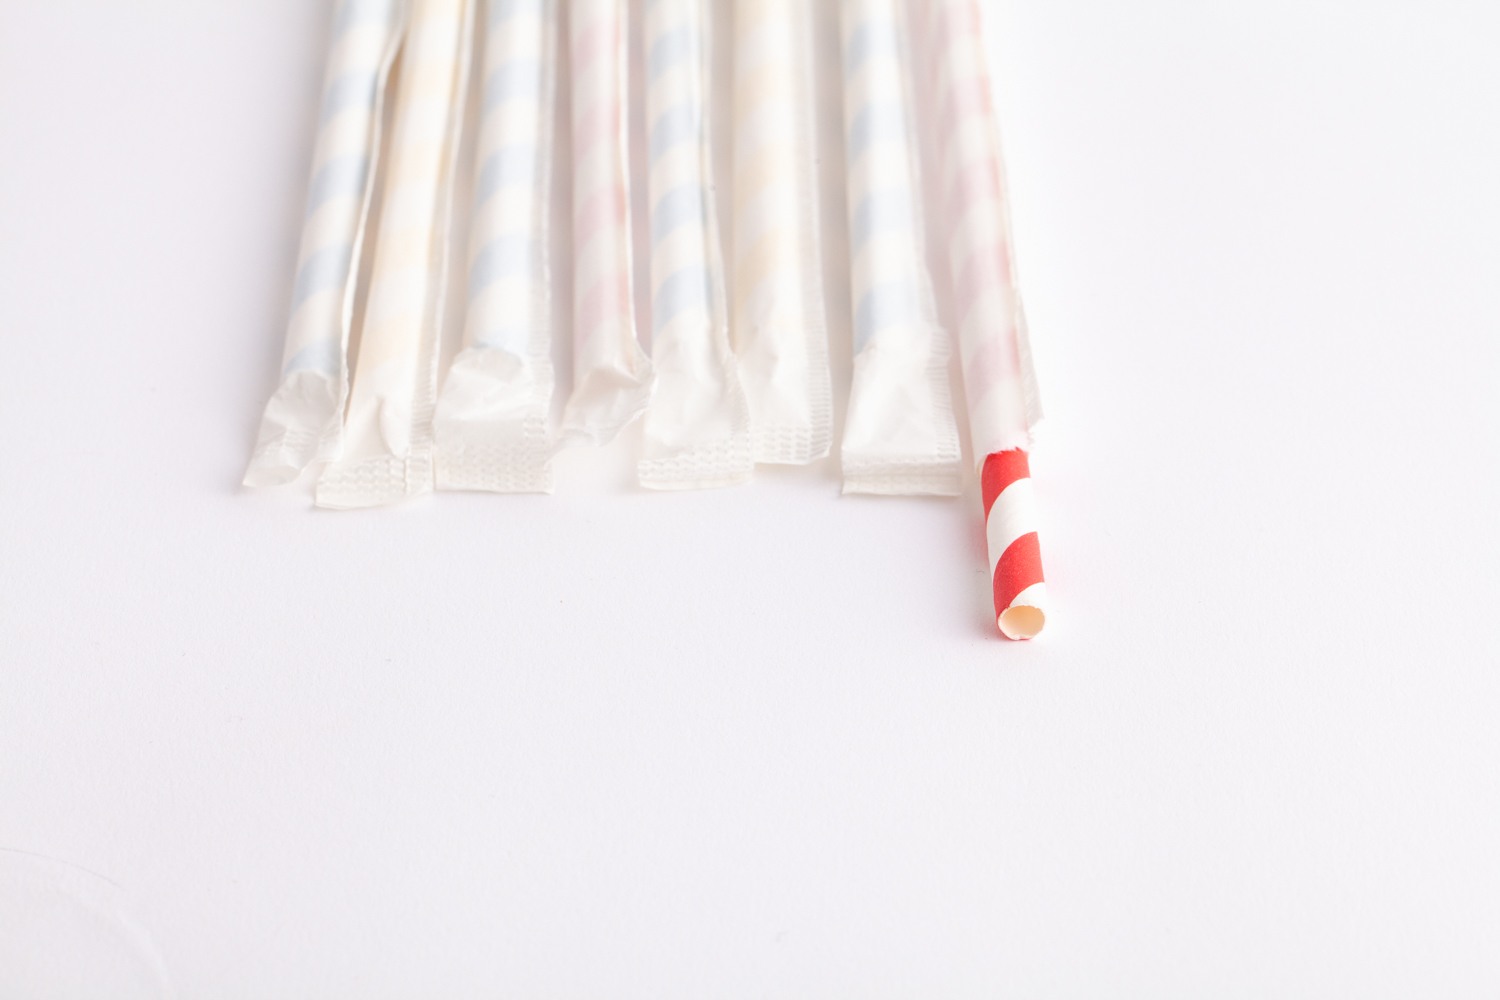 row of wrapped straws with one unwrapped showing candycane pattern on straw